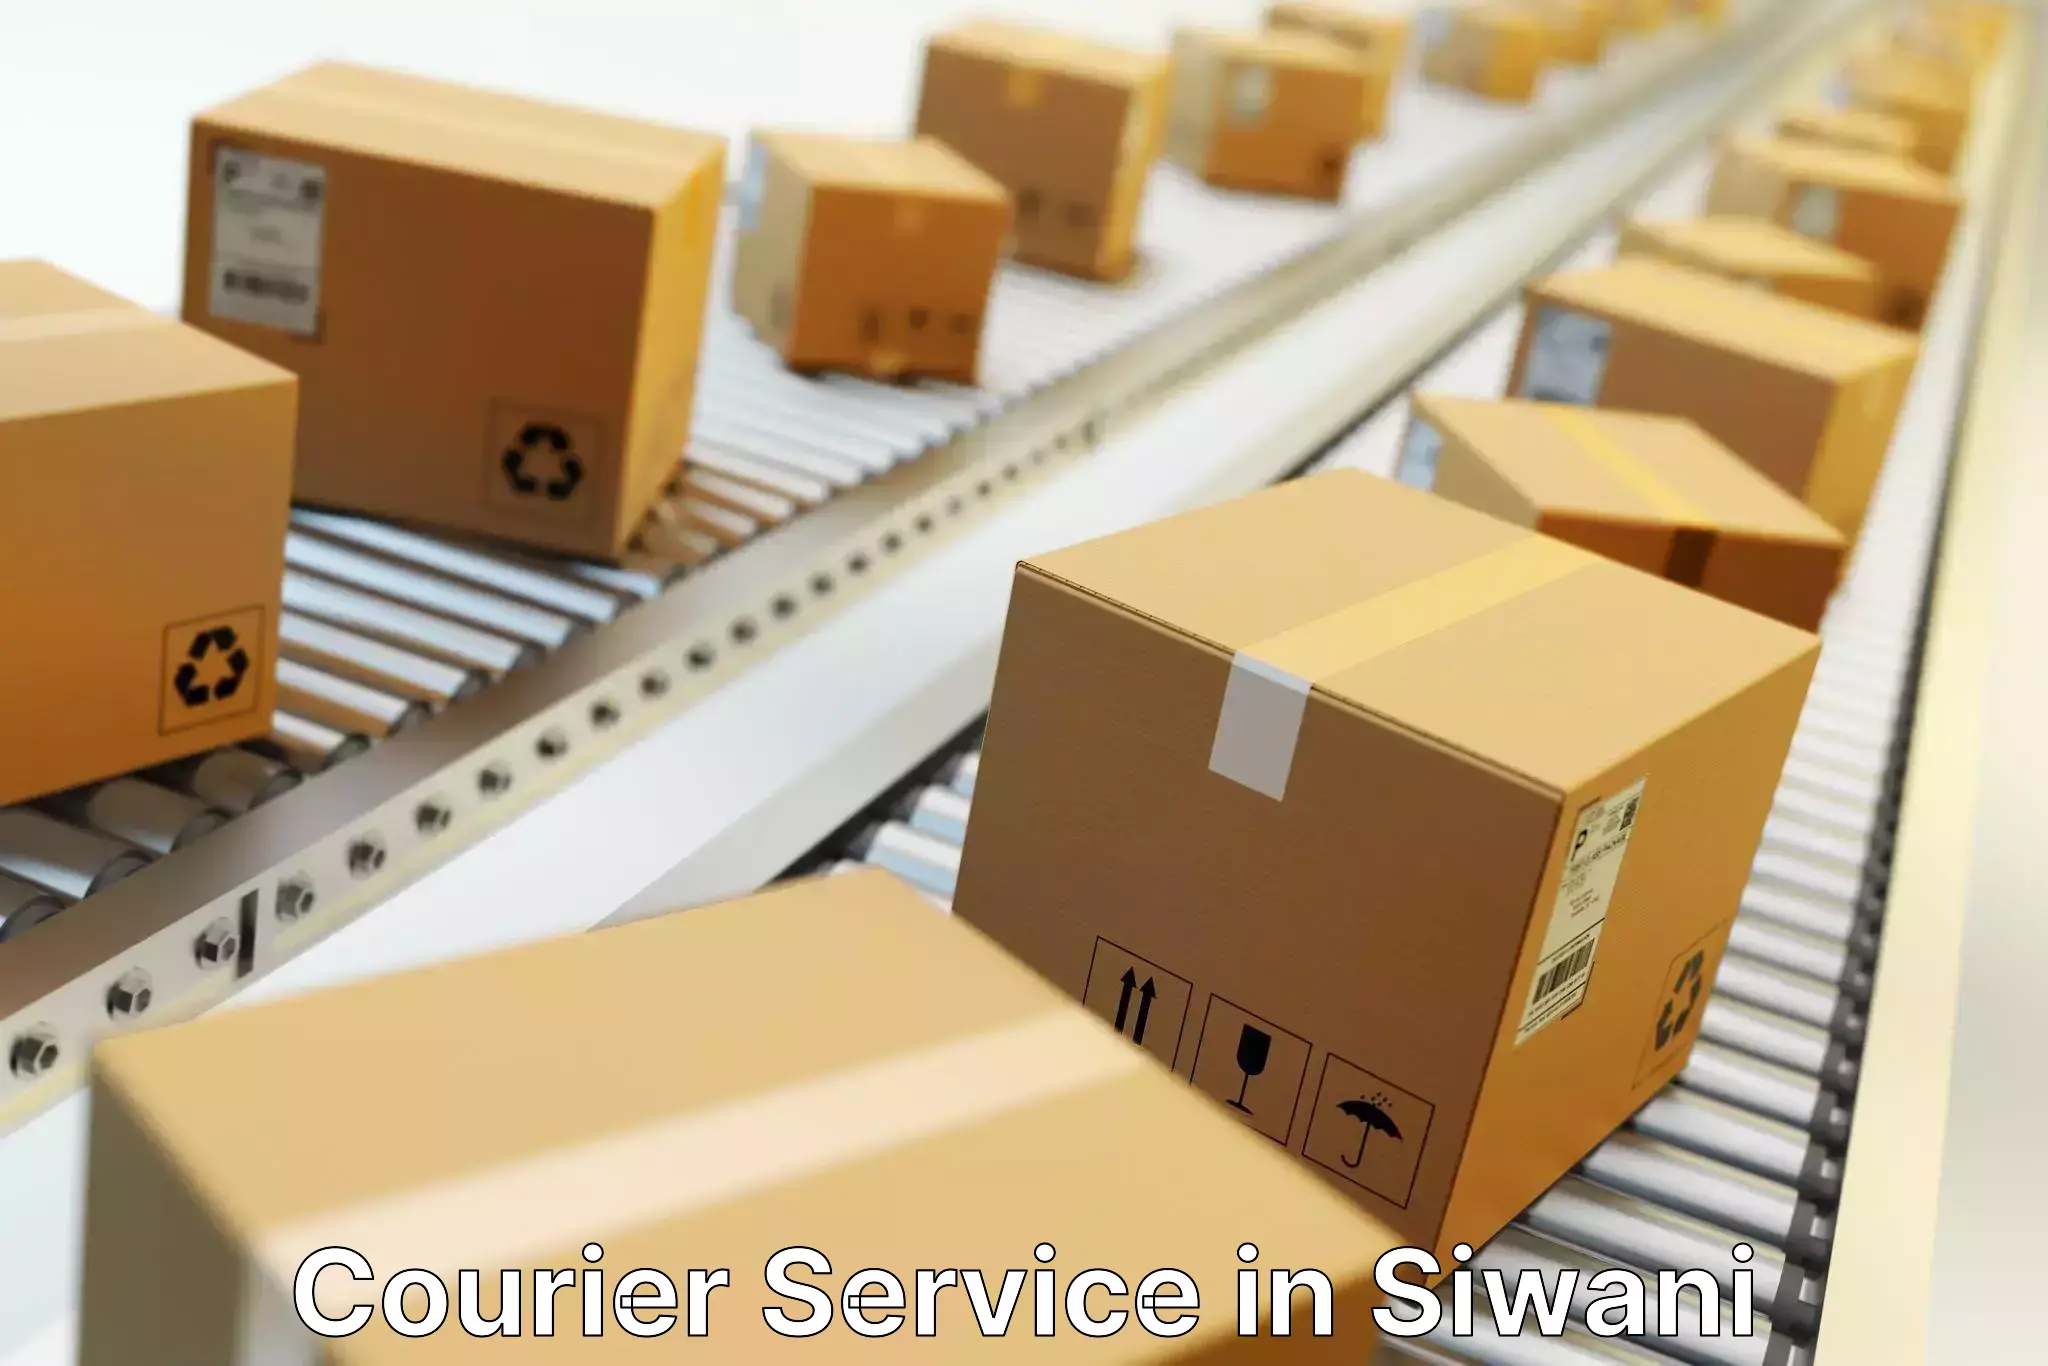 Premium courier services in Siwani